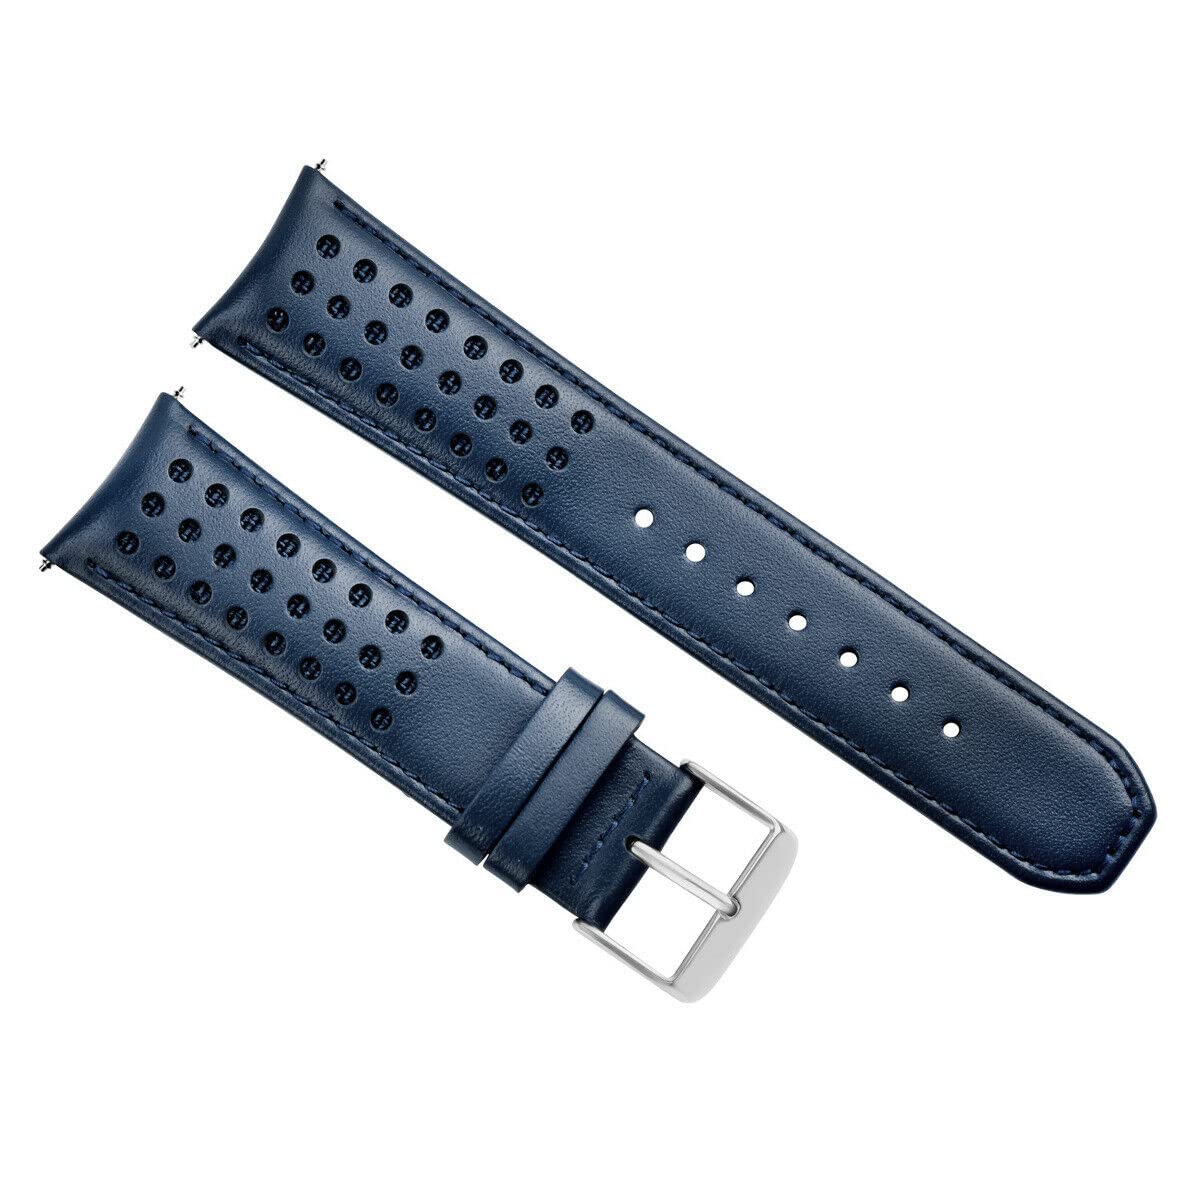 Ewatchparts 23MM WATCH BAND AT8020-03L H800-S081165 BLUE ANGELS LEATHER STRAP COMPATIBLE WITH CITIZEN